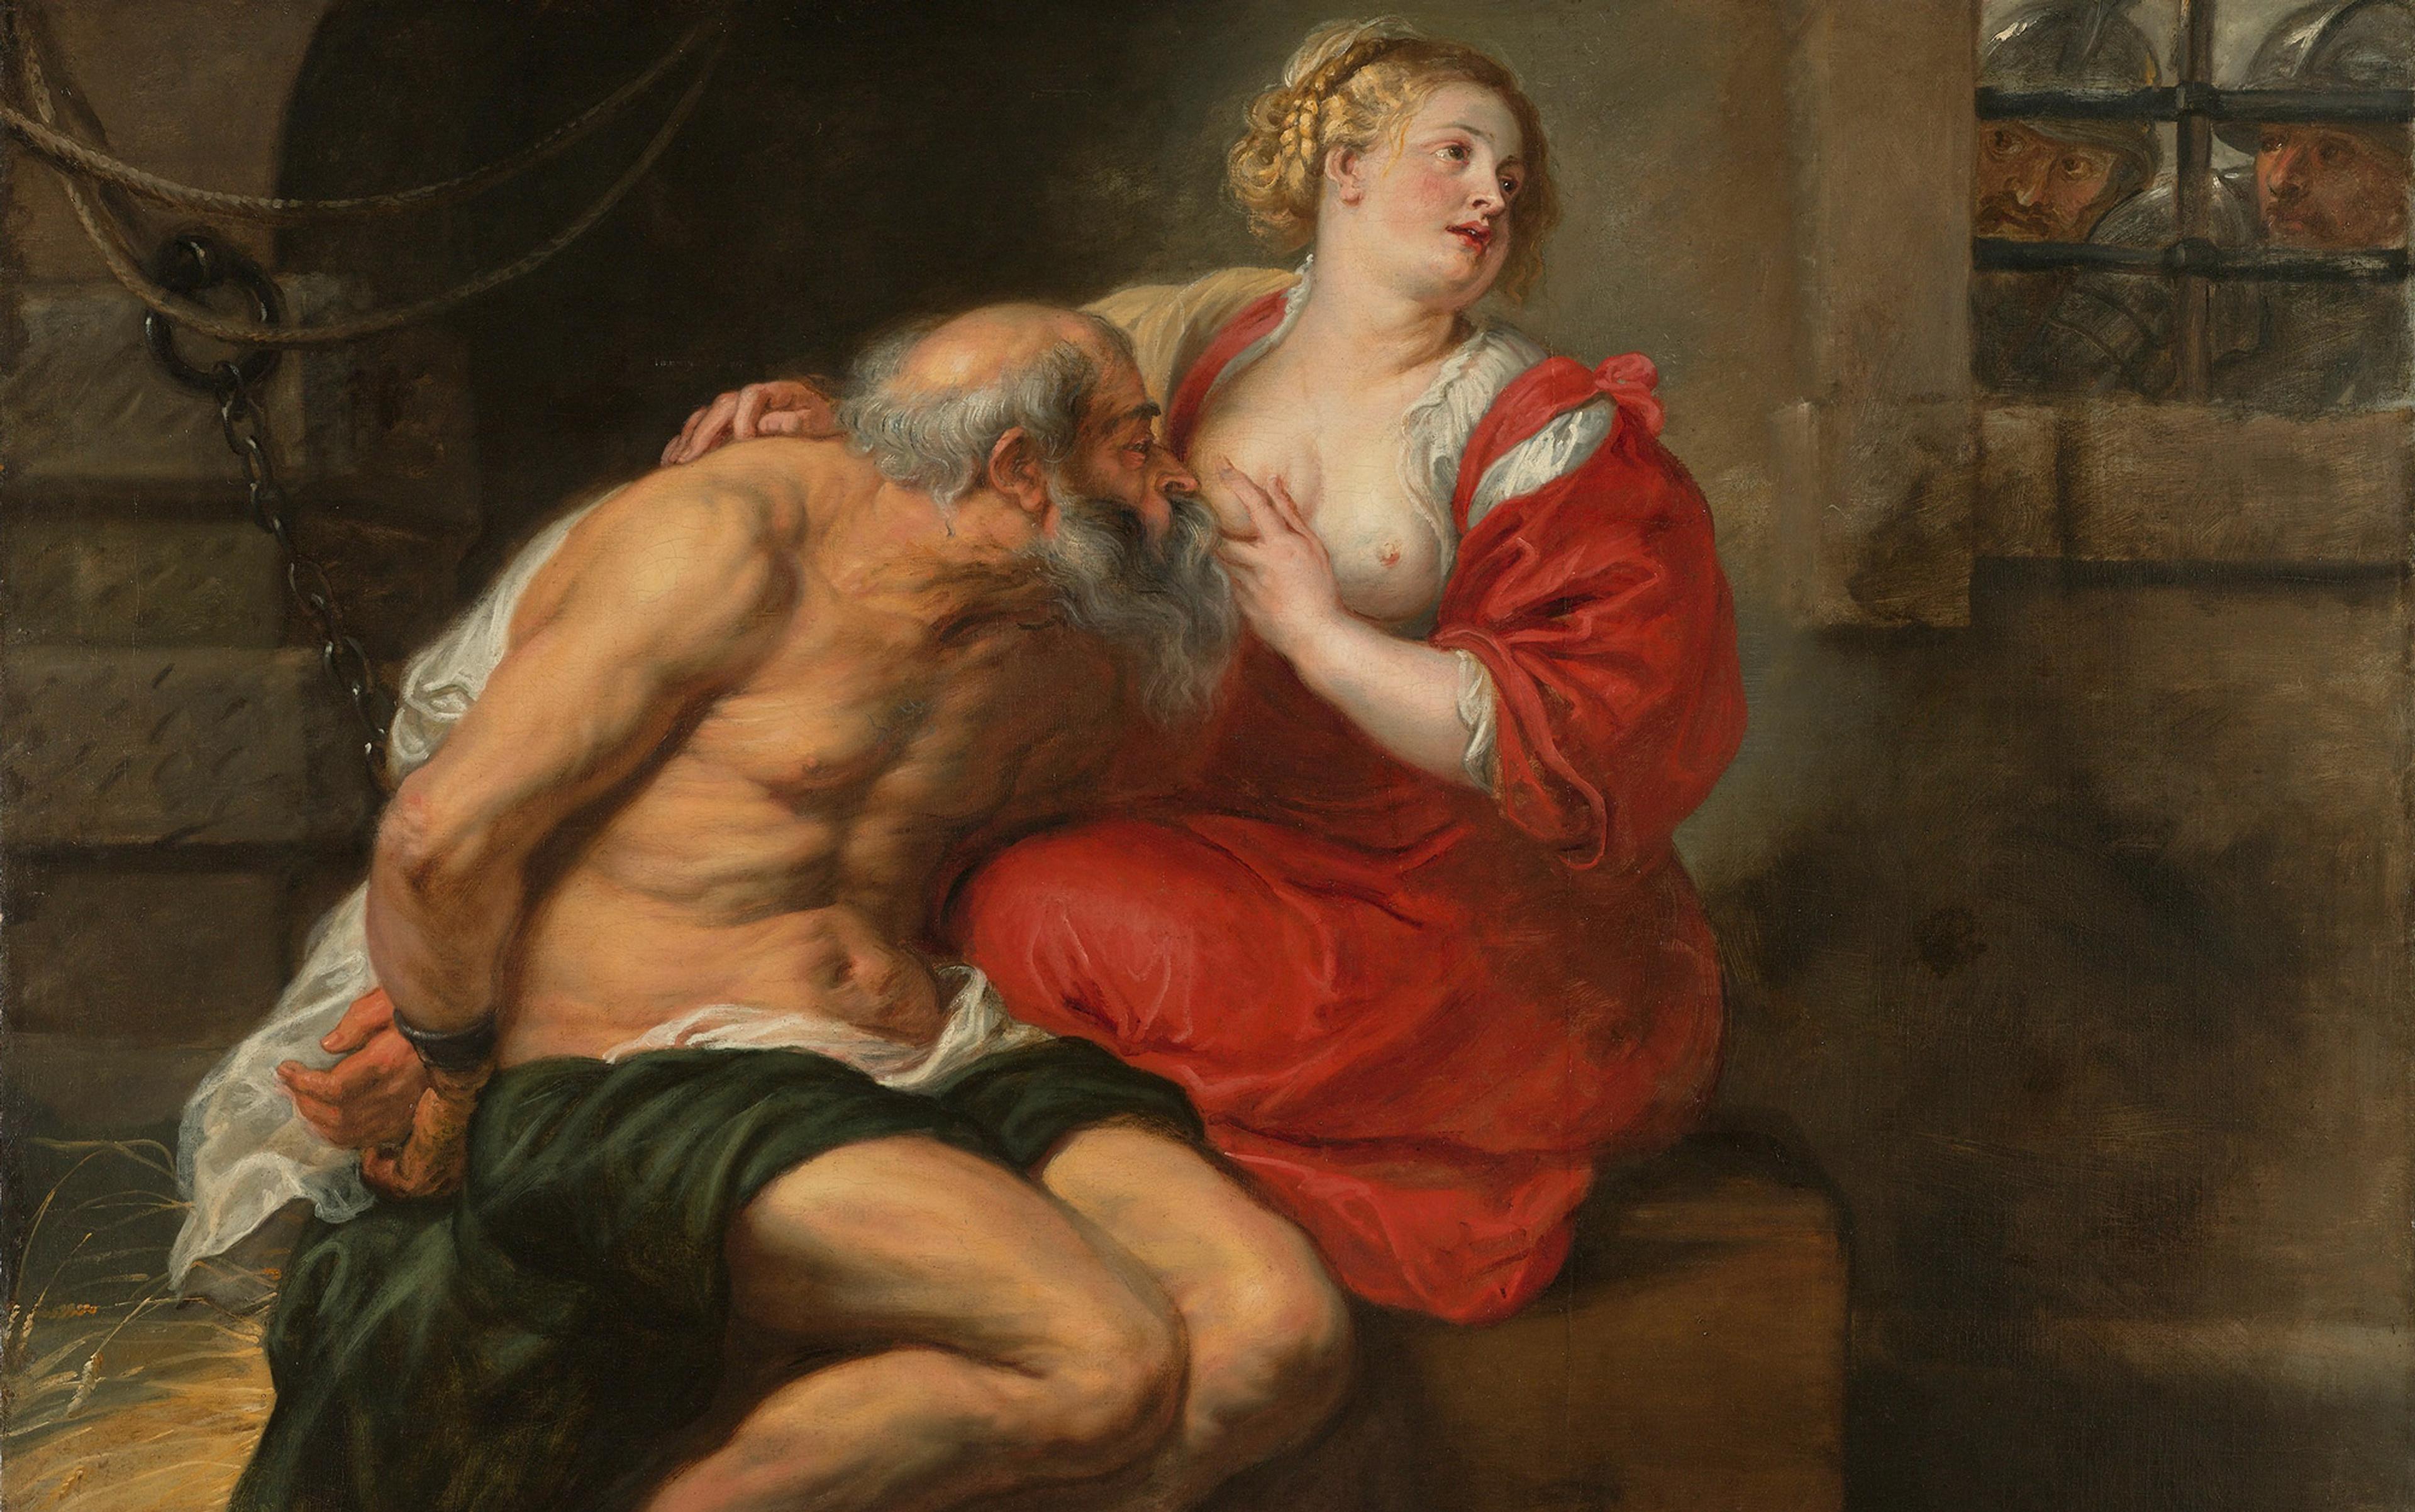 On Roman Charity, or a woman's filial debt to the patriarchy | Aeon Essays